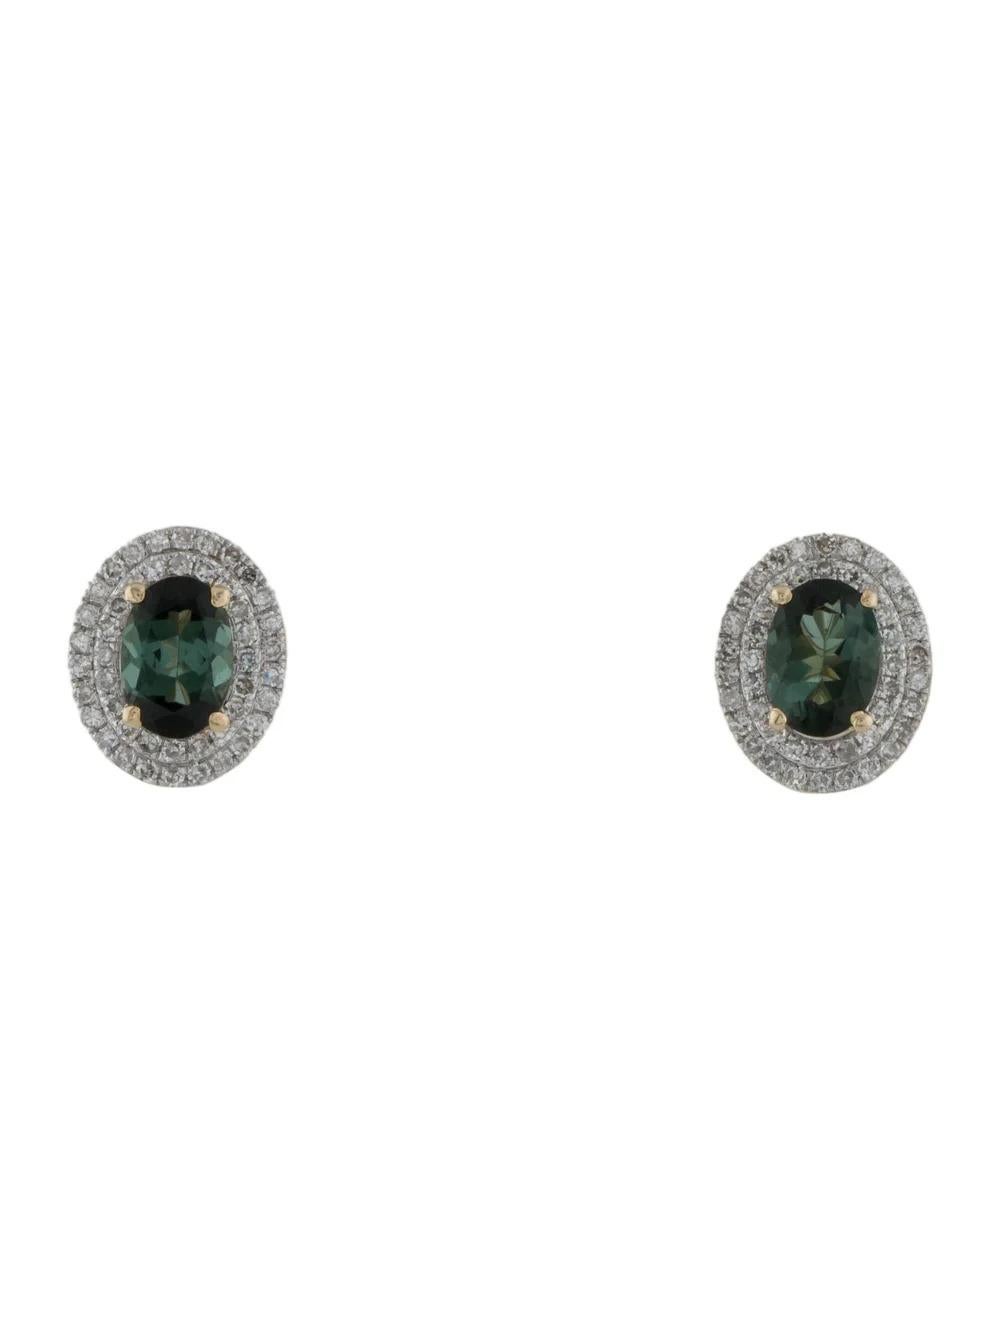 Introducing a stunning piece of fine jewelry, these Rhodium-Plated & 14K Yellow Gold earrings feature a mesmerizing 1.29 Carat Oval Modified Brilliant Tourmaline, perfectly complemented by shimmering Diamonds. Here are the details:

* Metal: 14K